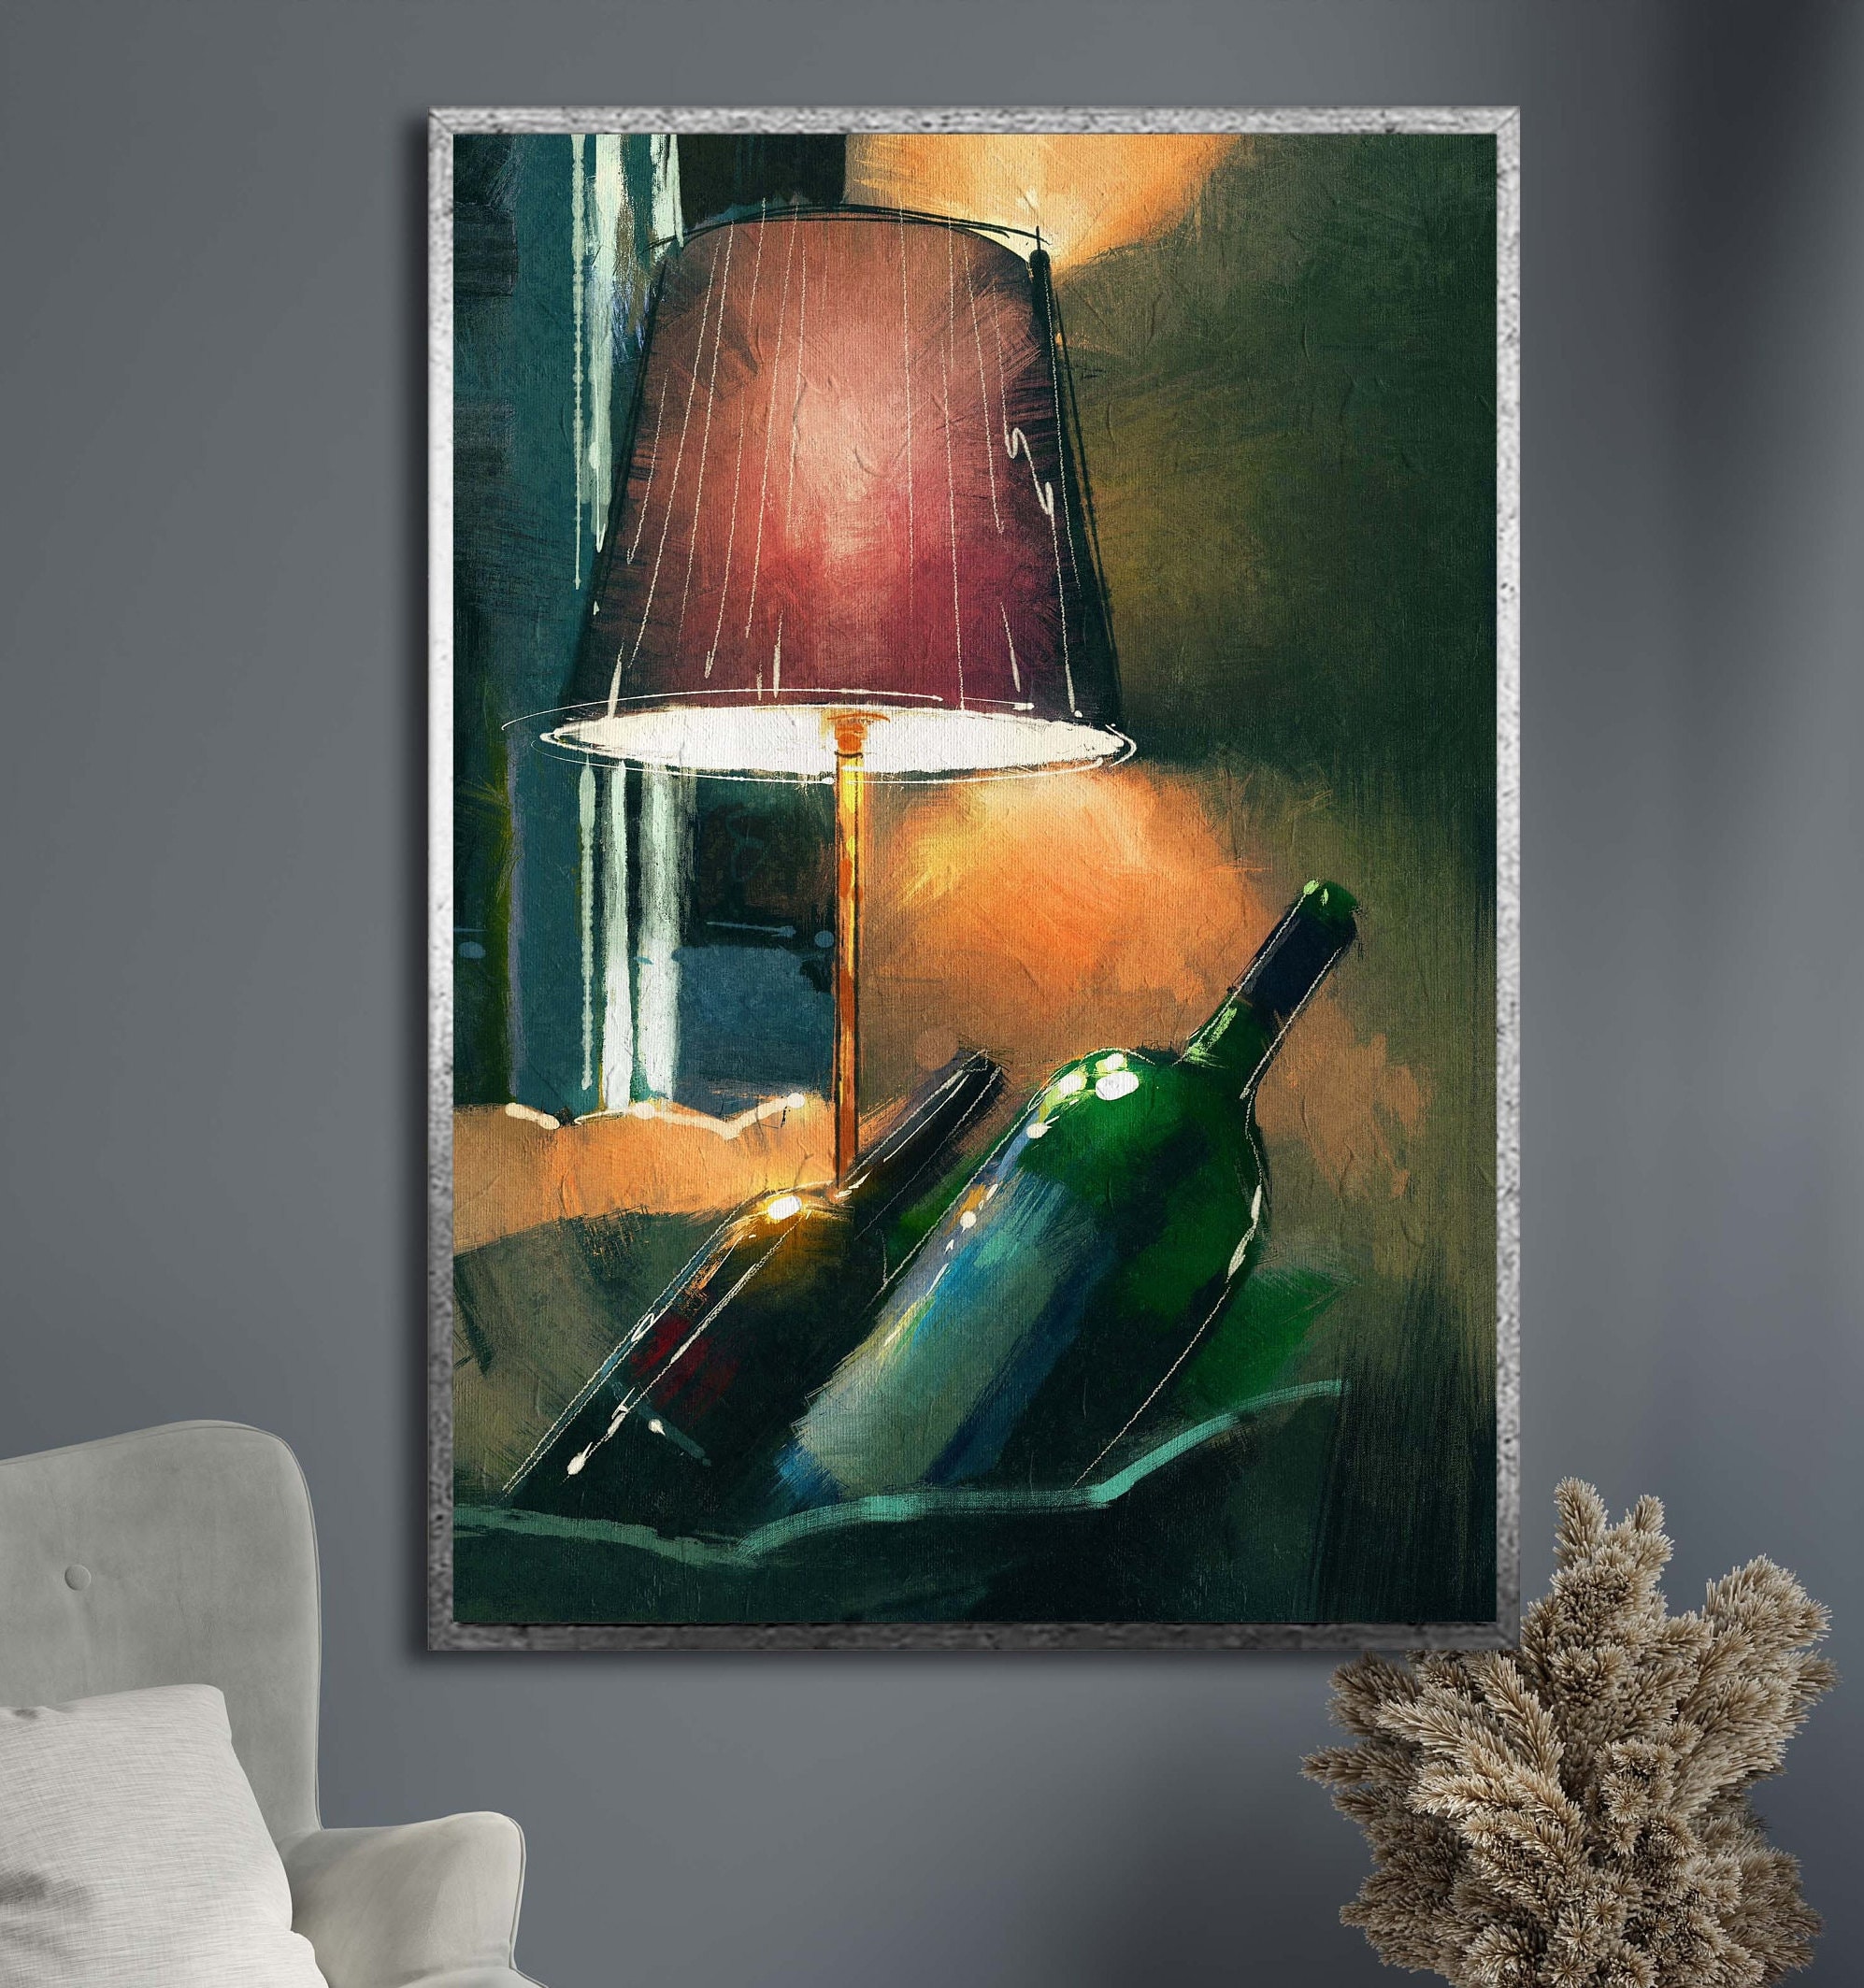 Abstract Wall Art Red Wine Splash Pictures Wine Bottle Paintings Panels Peinted on Canvas for Kitchen Rustic House Decor Giclee Modern Artwork Frame - 3